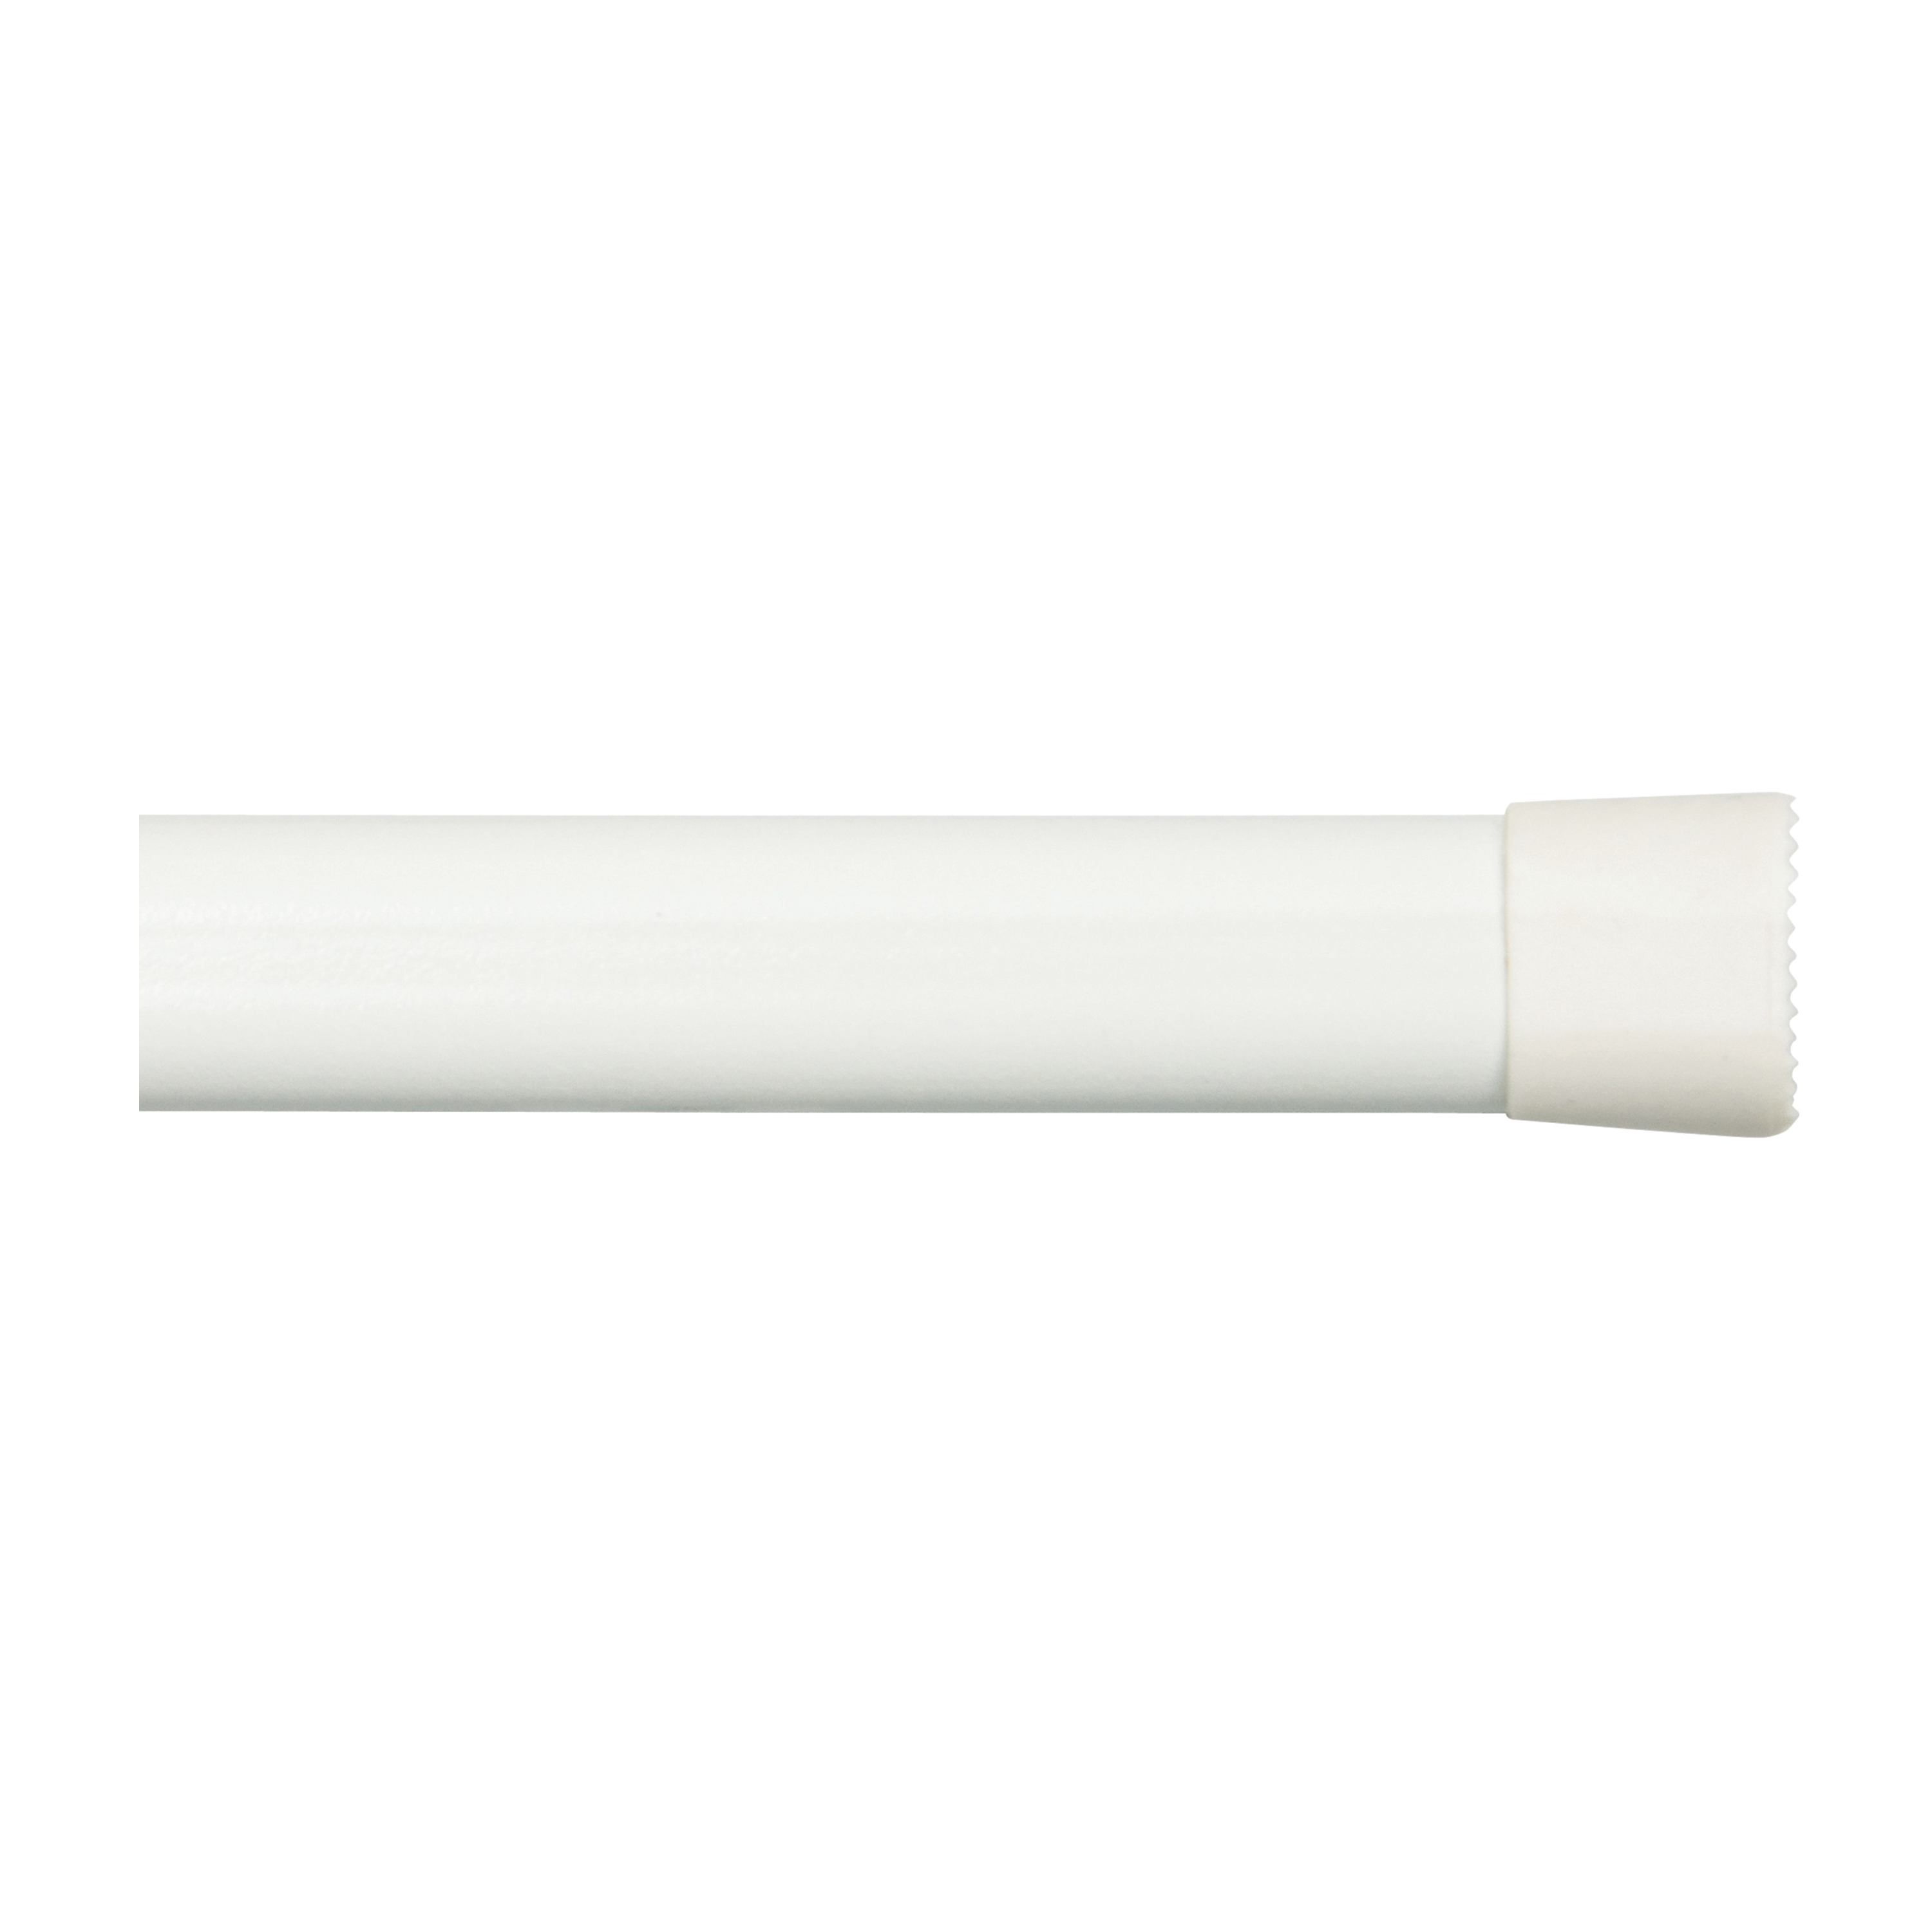 Kenney KN616 Spring Tension Rod, 5/8 in Dia, 22 to 36 in L, Plastic, White - 1